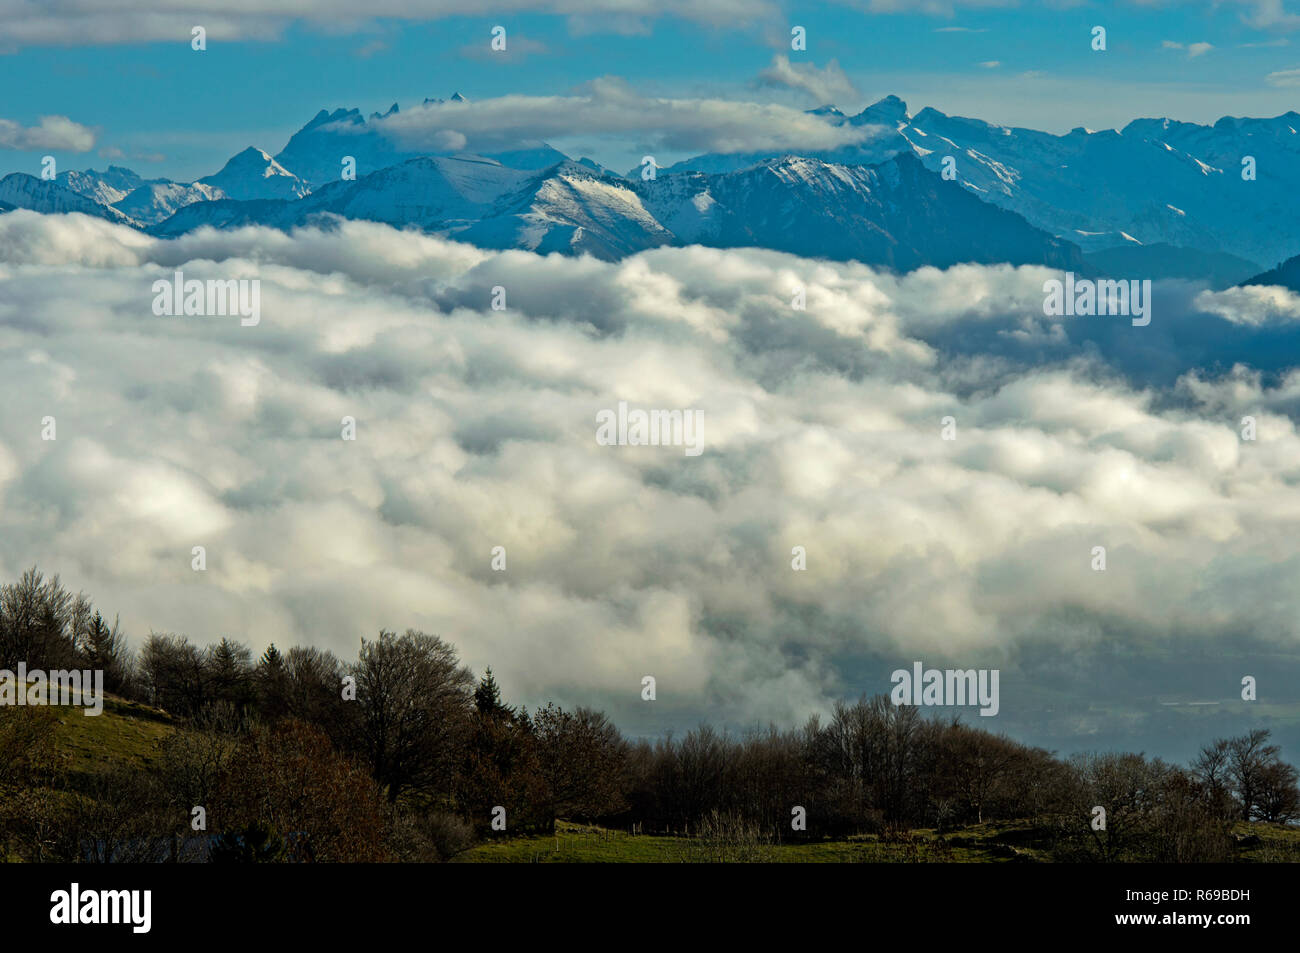 View Across The Sea Of Fog In The Arve Valley To The Peaks Of The French Alps, Haute-Savoie, France Stock Photo